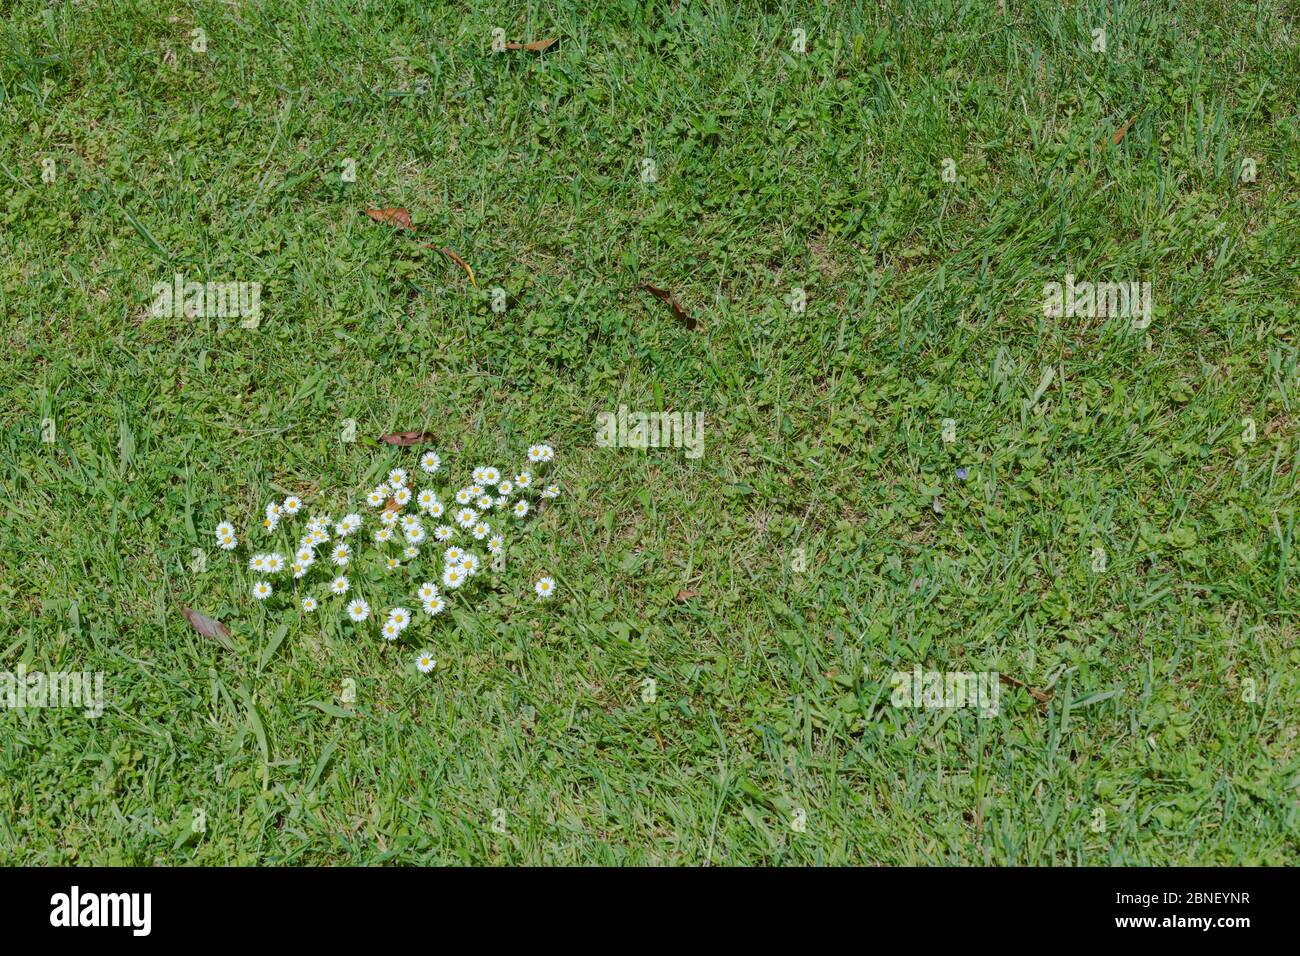 Clump of white English Daisies / Bellis perennis overtaking an area of lawn. Bellis perennis is a common UK garden weed. Once used as a medicinal tea. Stock Photo